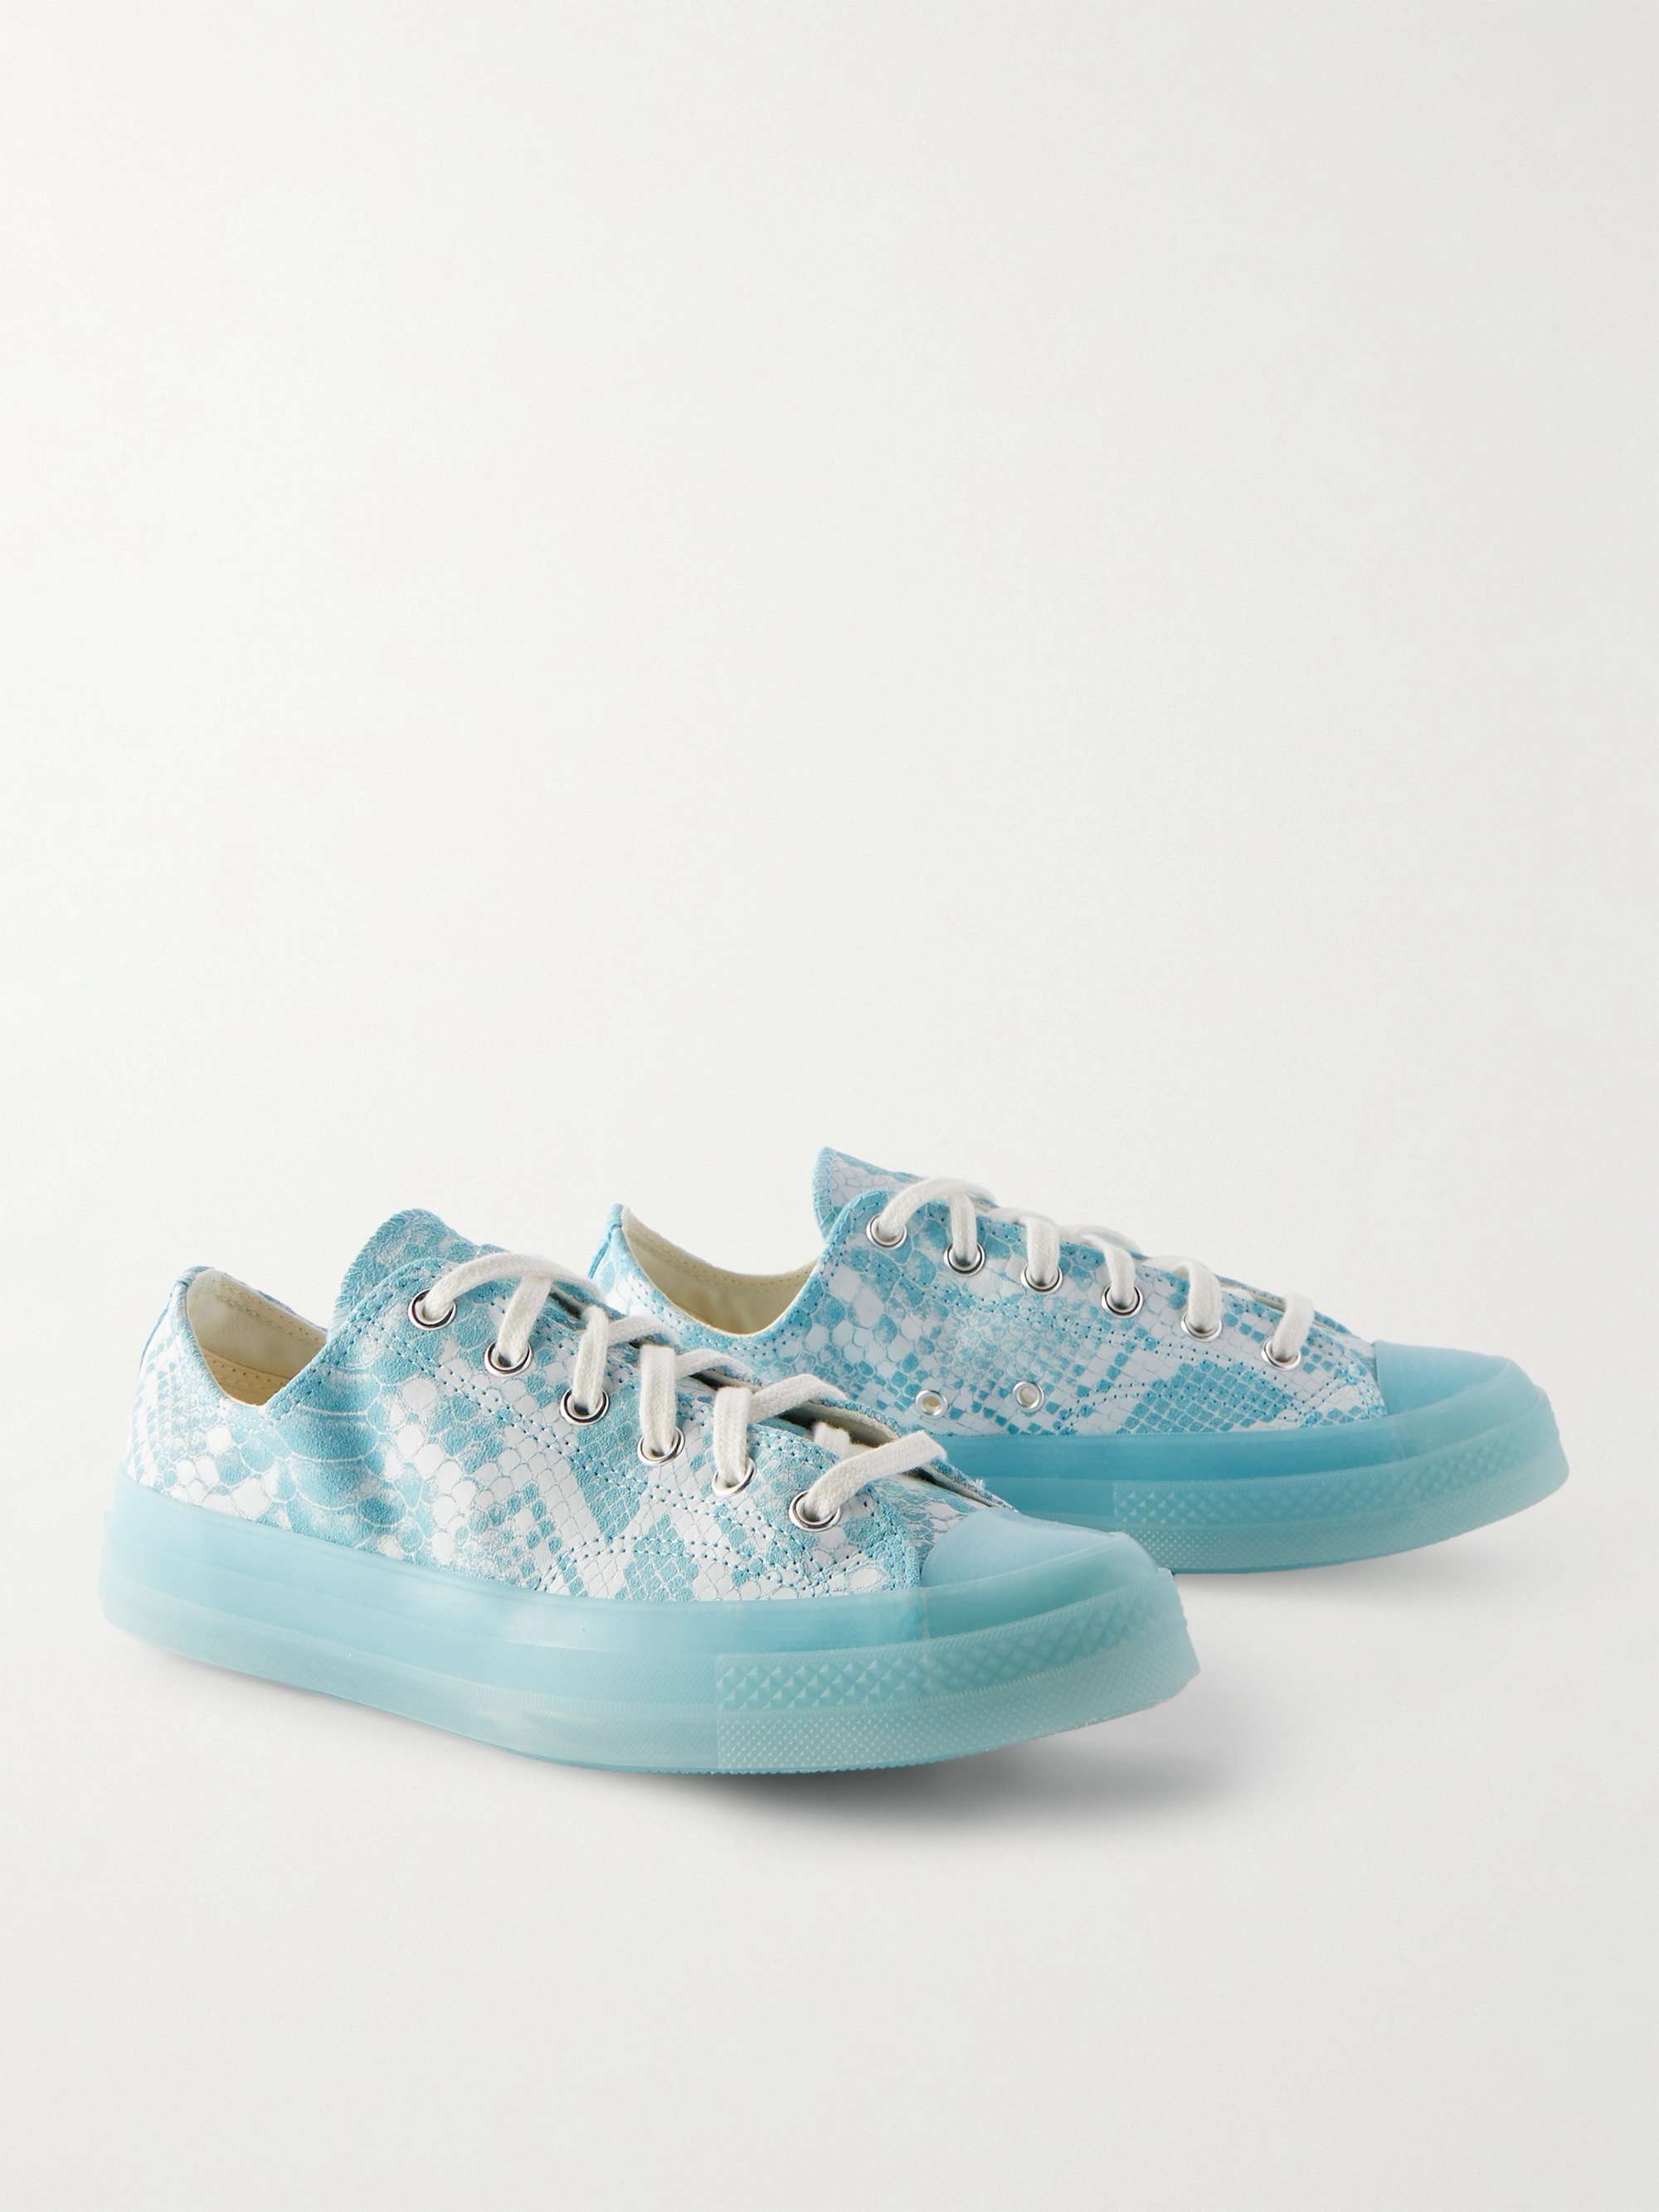 CONVERSE + Golf Wang Chuck 70 OX Snake-Effect Leather Sneakers